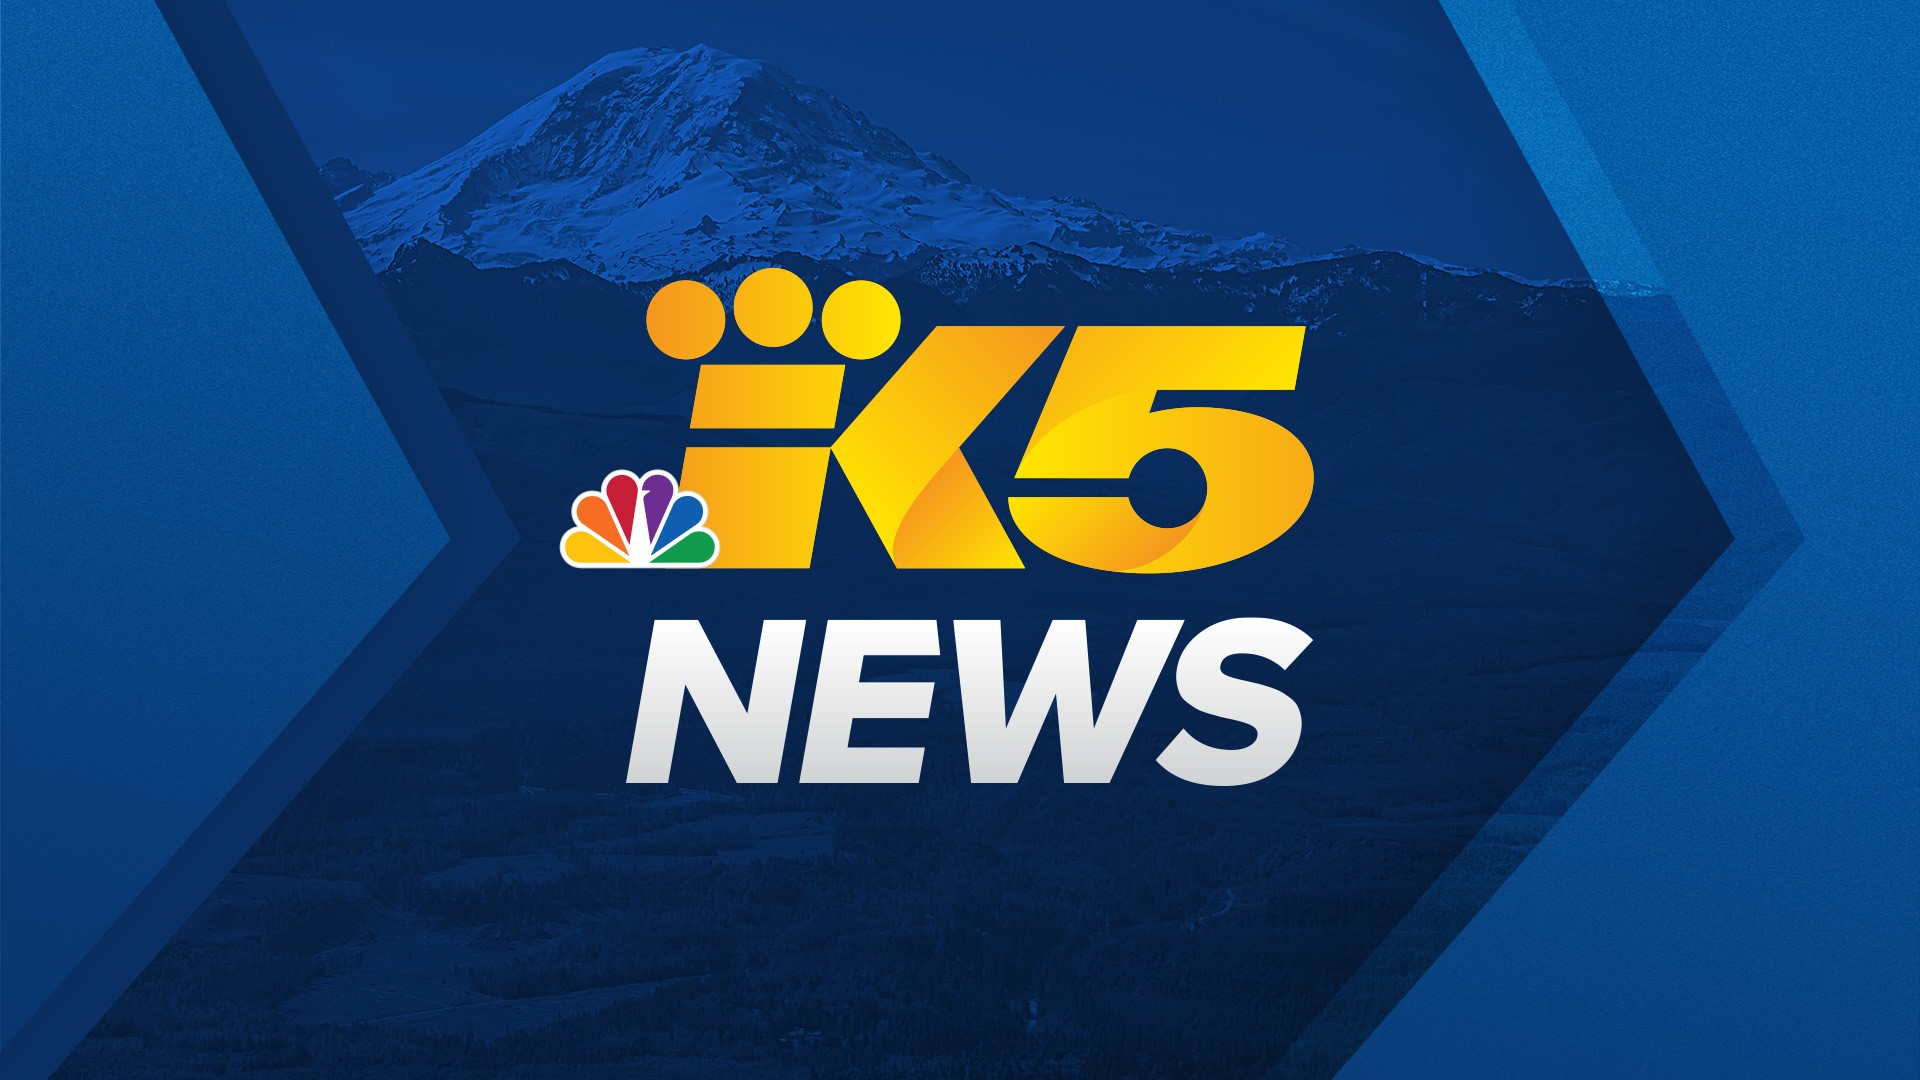 The KING 5 News Team offers an in-depth look at news of the morning as well as timely updates on business, sports, weather conditions and traffic.